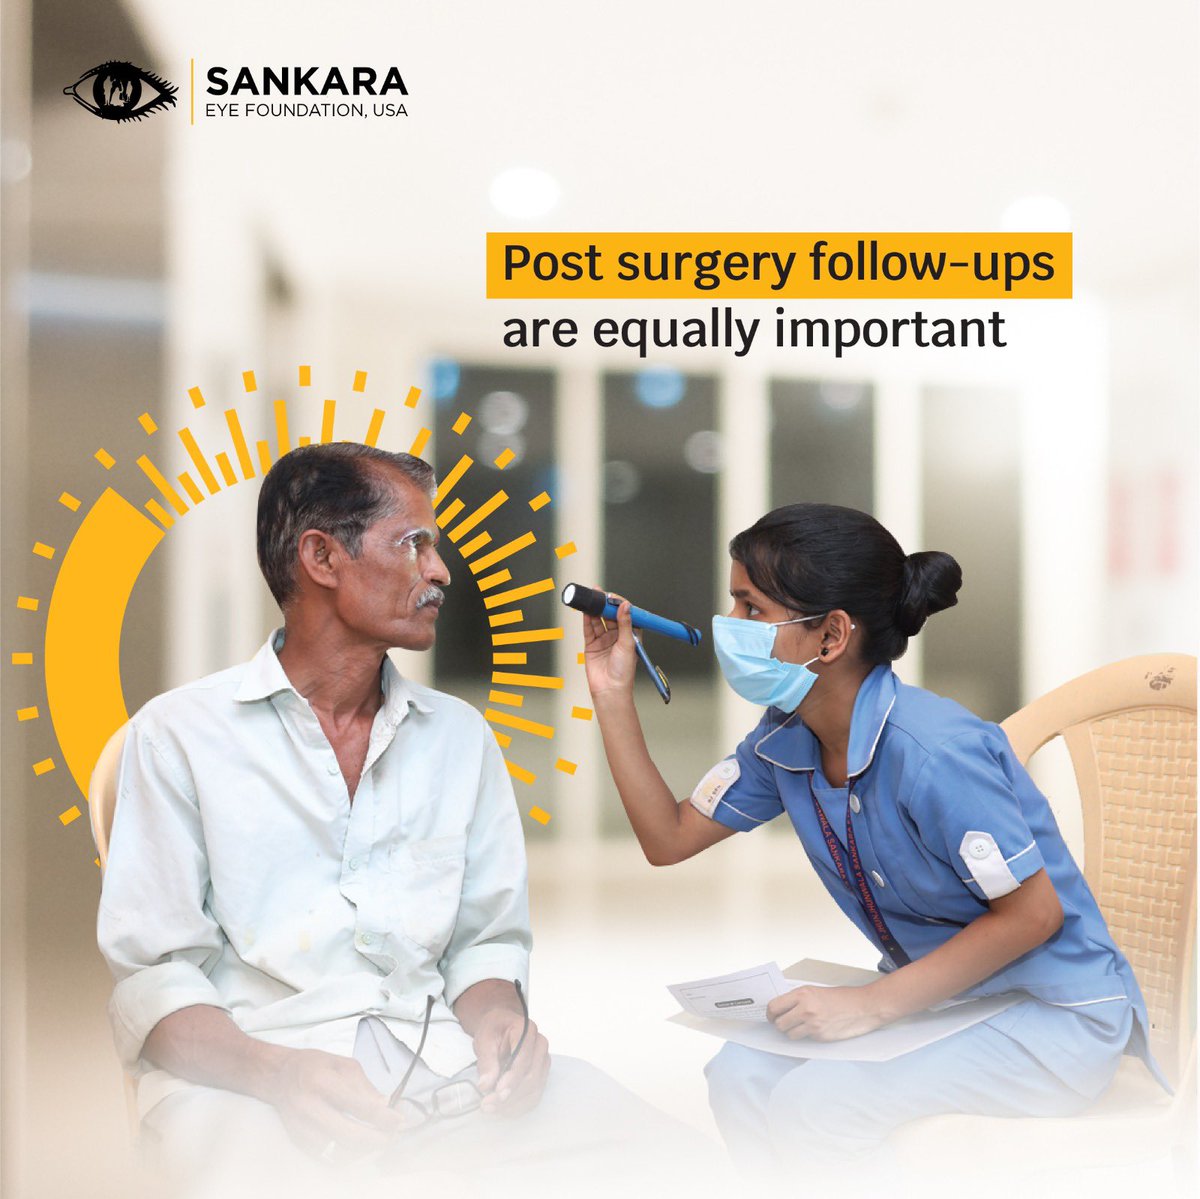 While we provide free eye surgeries to the needy we also ensure the patients receive systematic follow-ups for effective post-operative care. ​

Donate at giftofvision.org

#sankaraeyefoundation #sankaraeyehospitals #eyehospitals #eyes #eyesight #donate #ngo #nonprofit